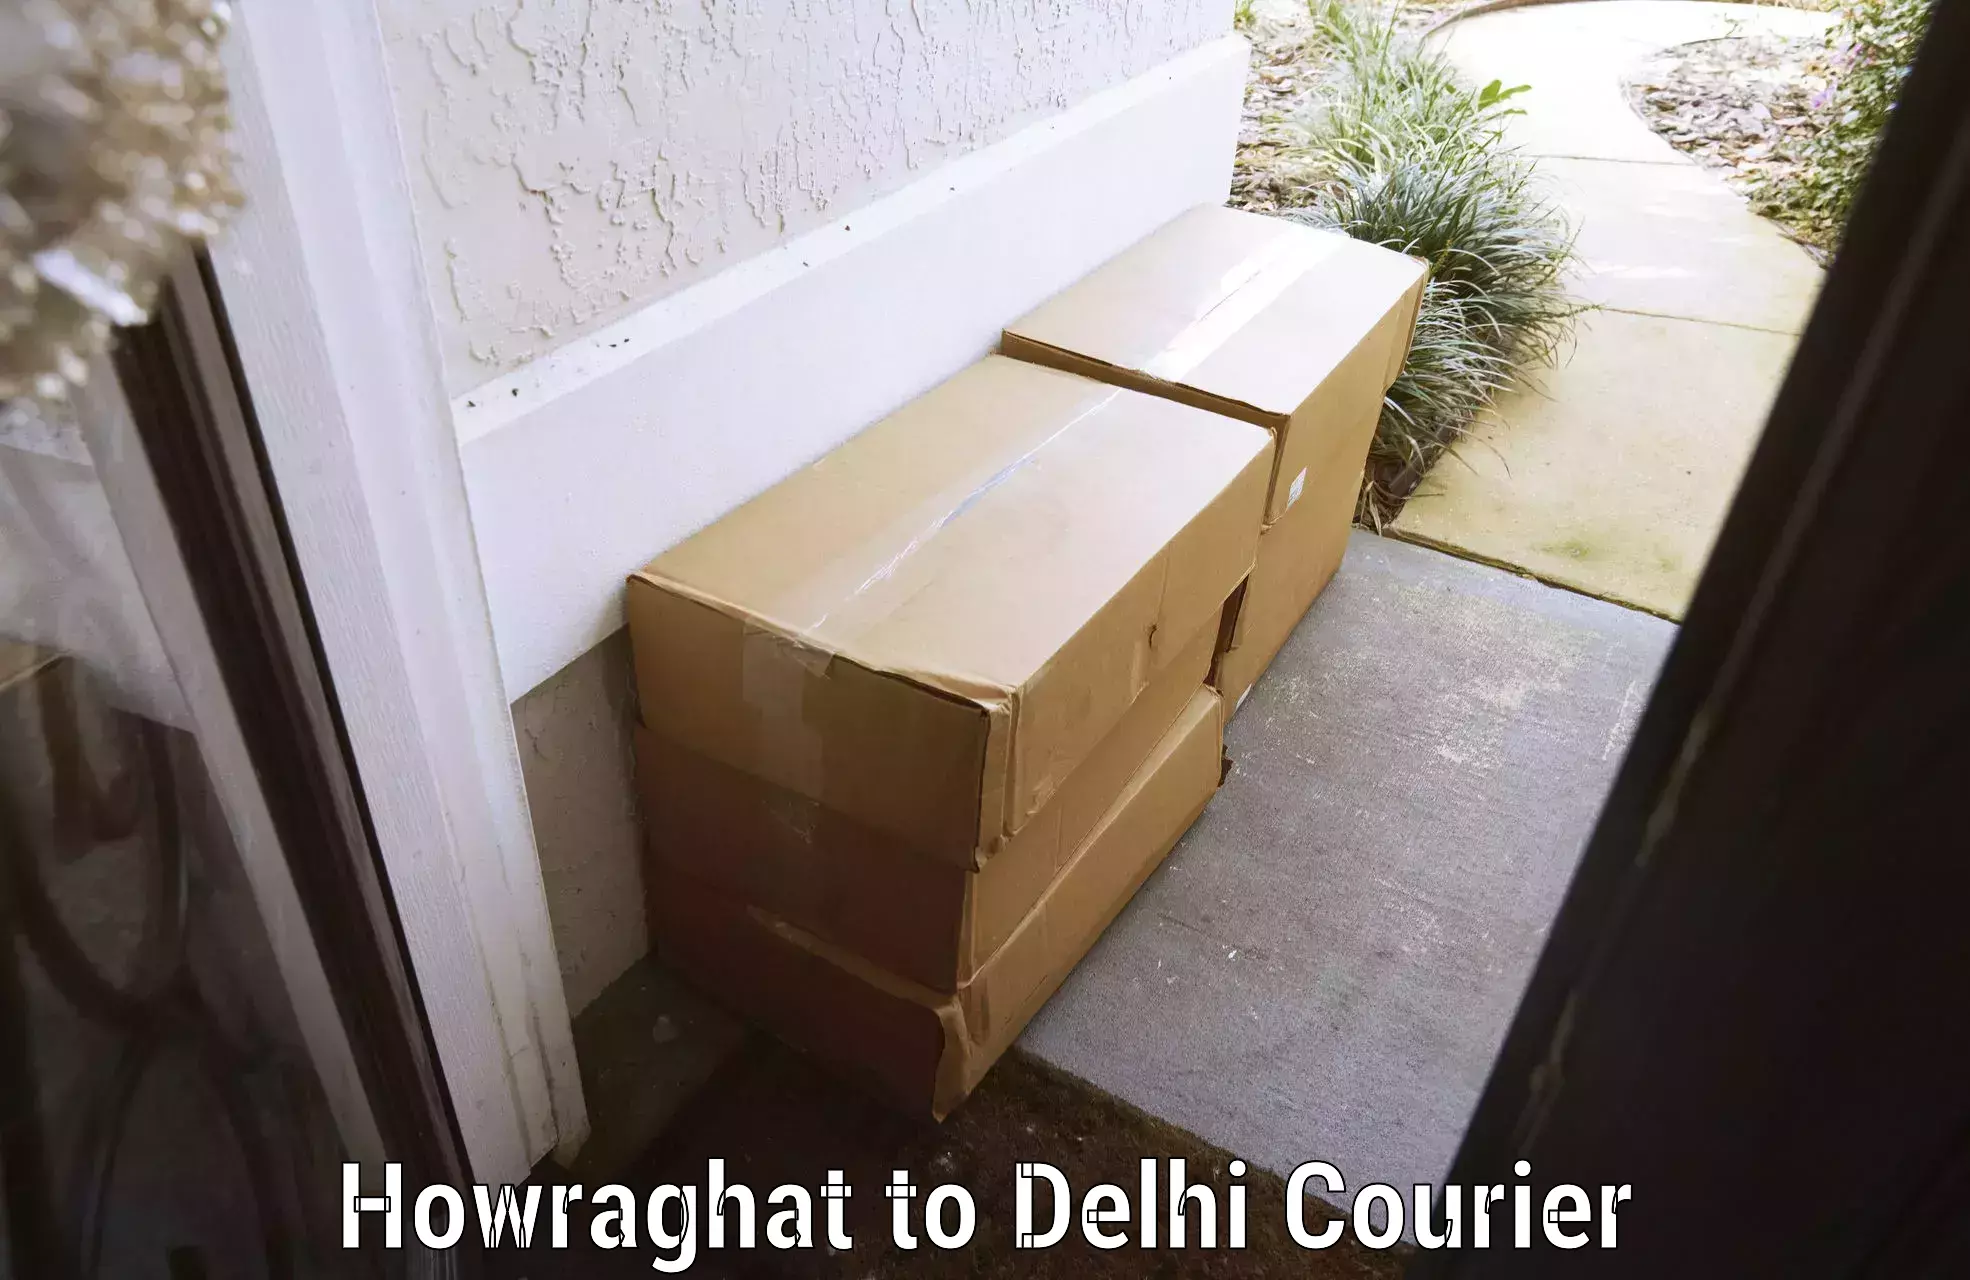 Baggage shipping calculator Howraghat to Delhi